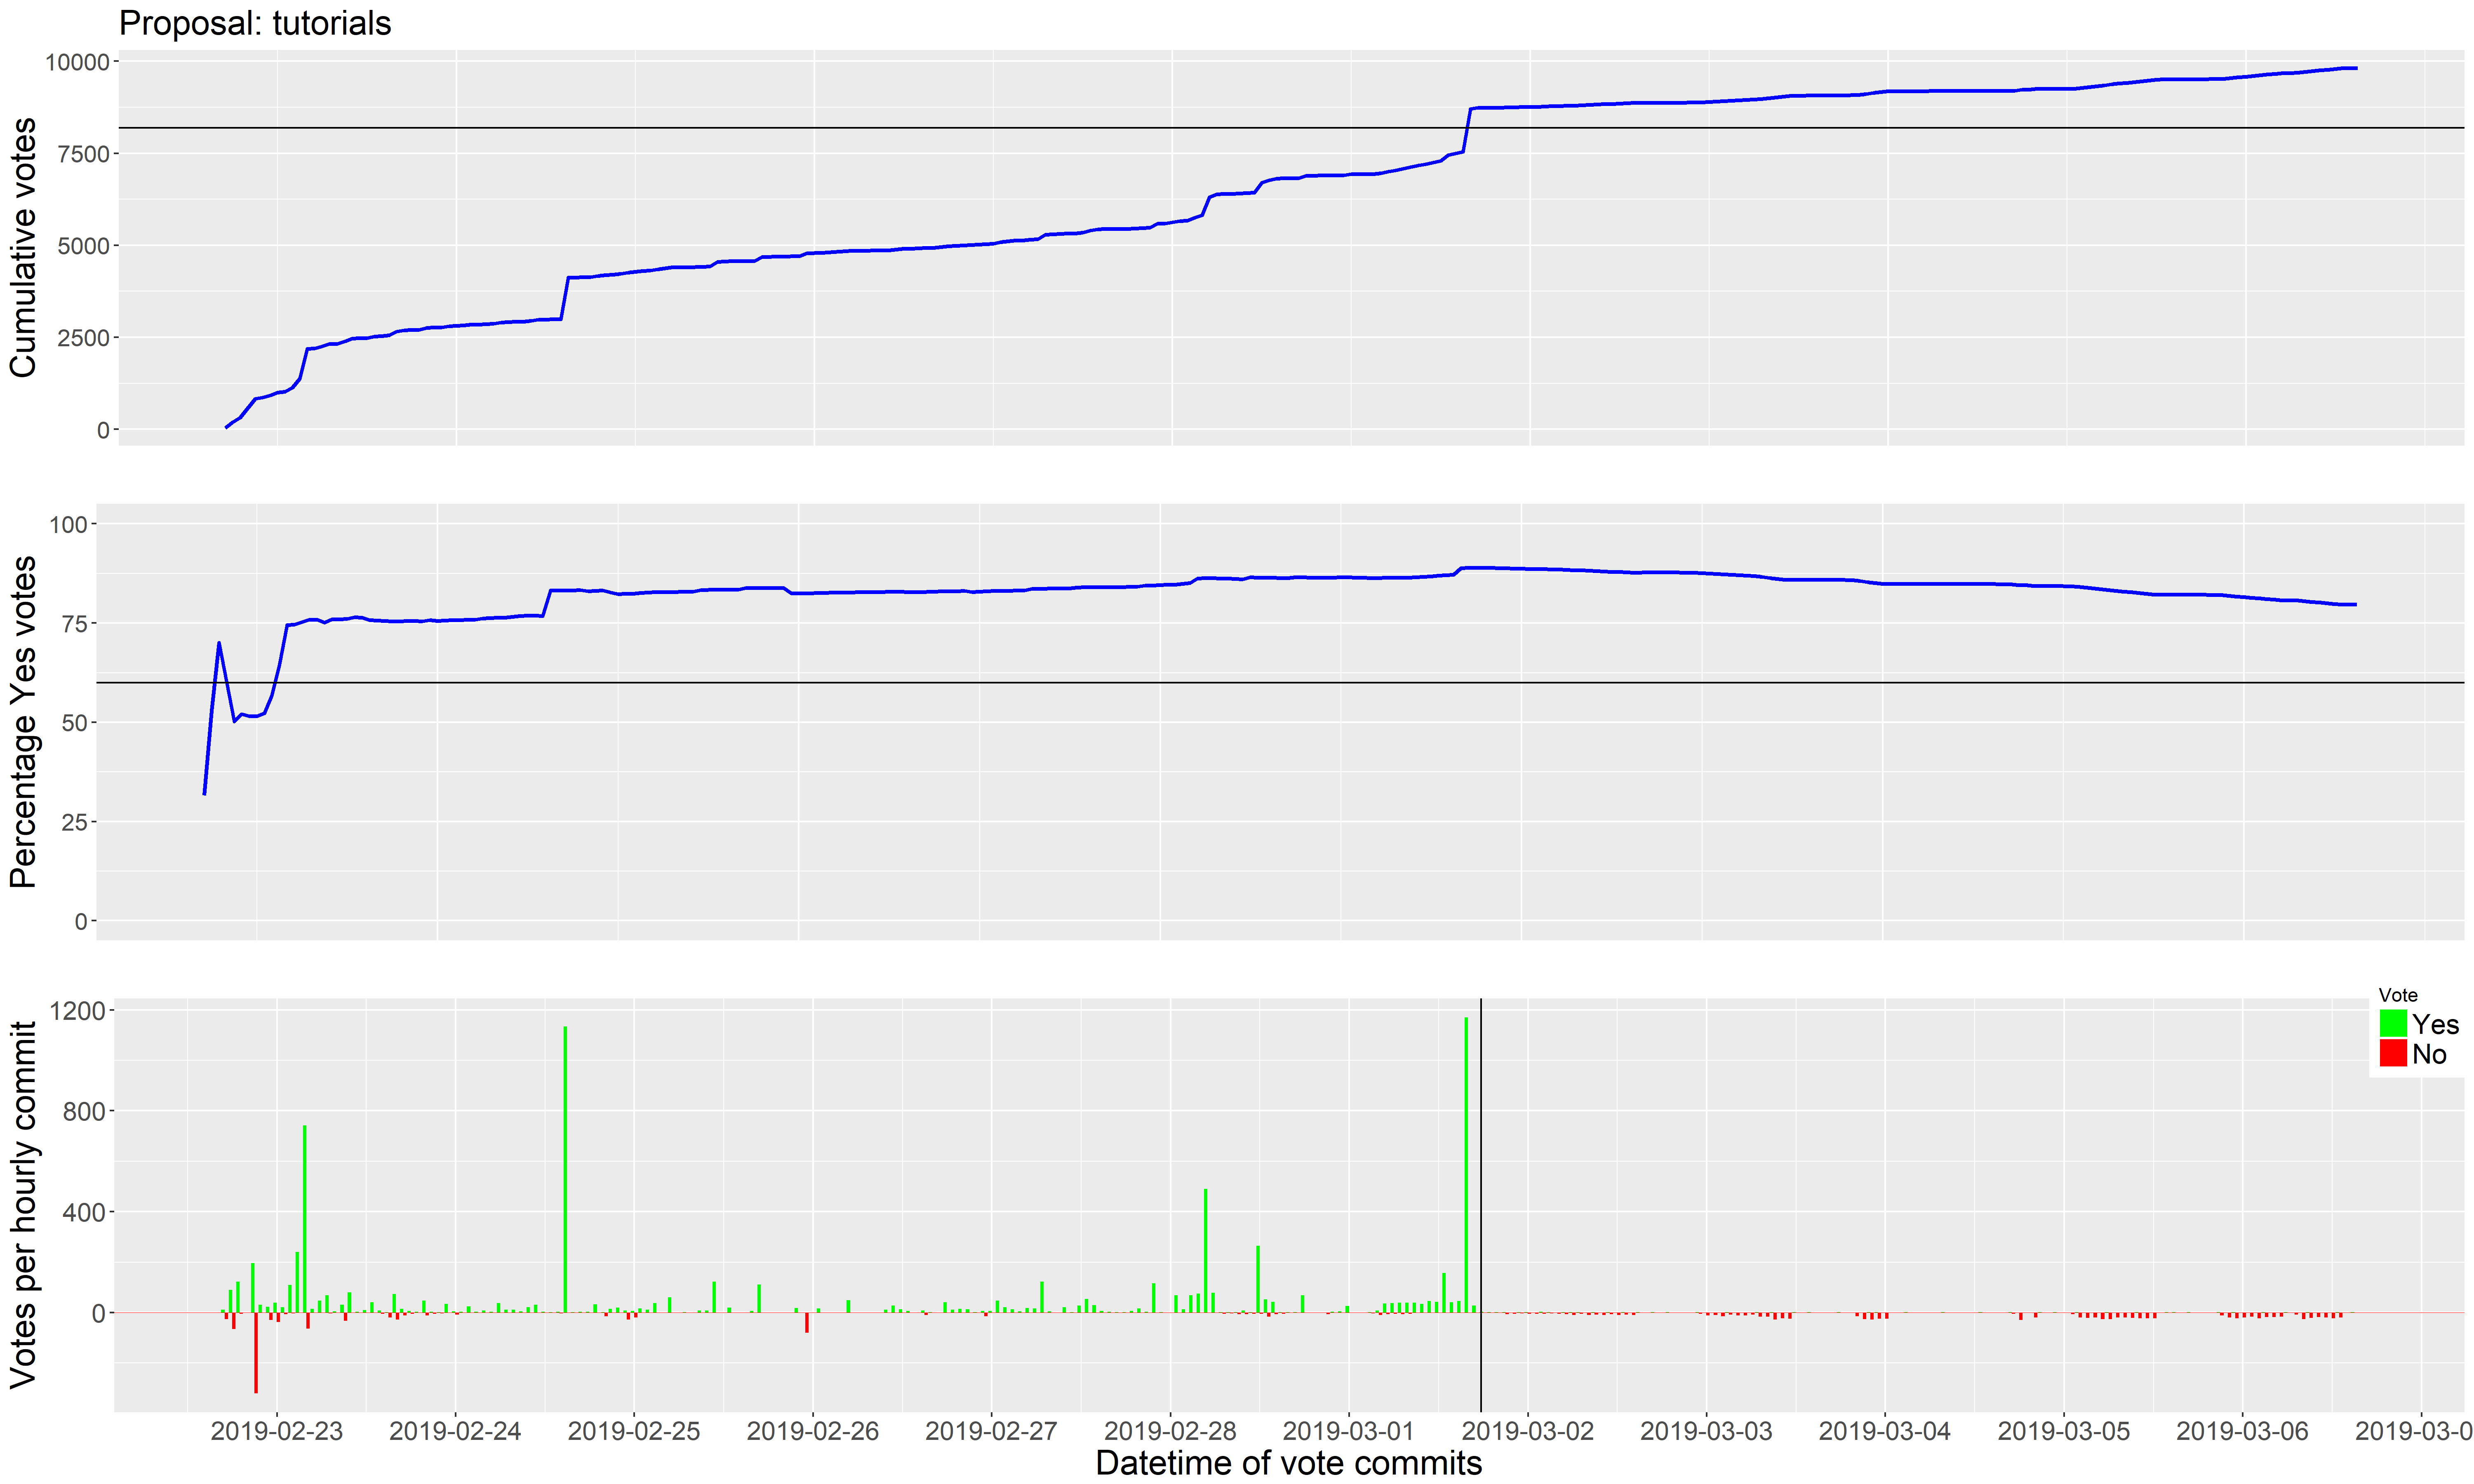 Votes over time for the Tutorials proposal